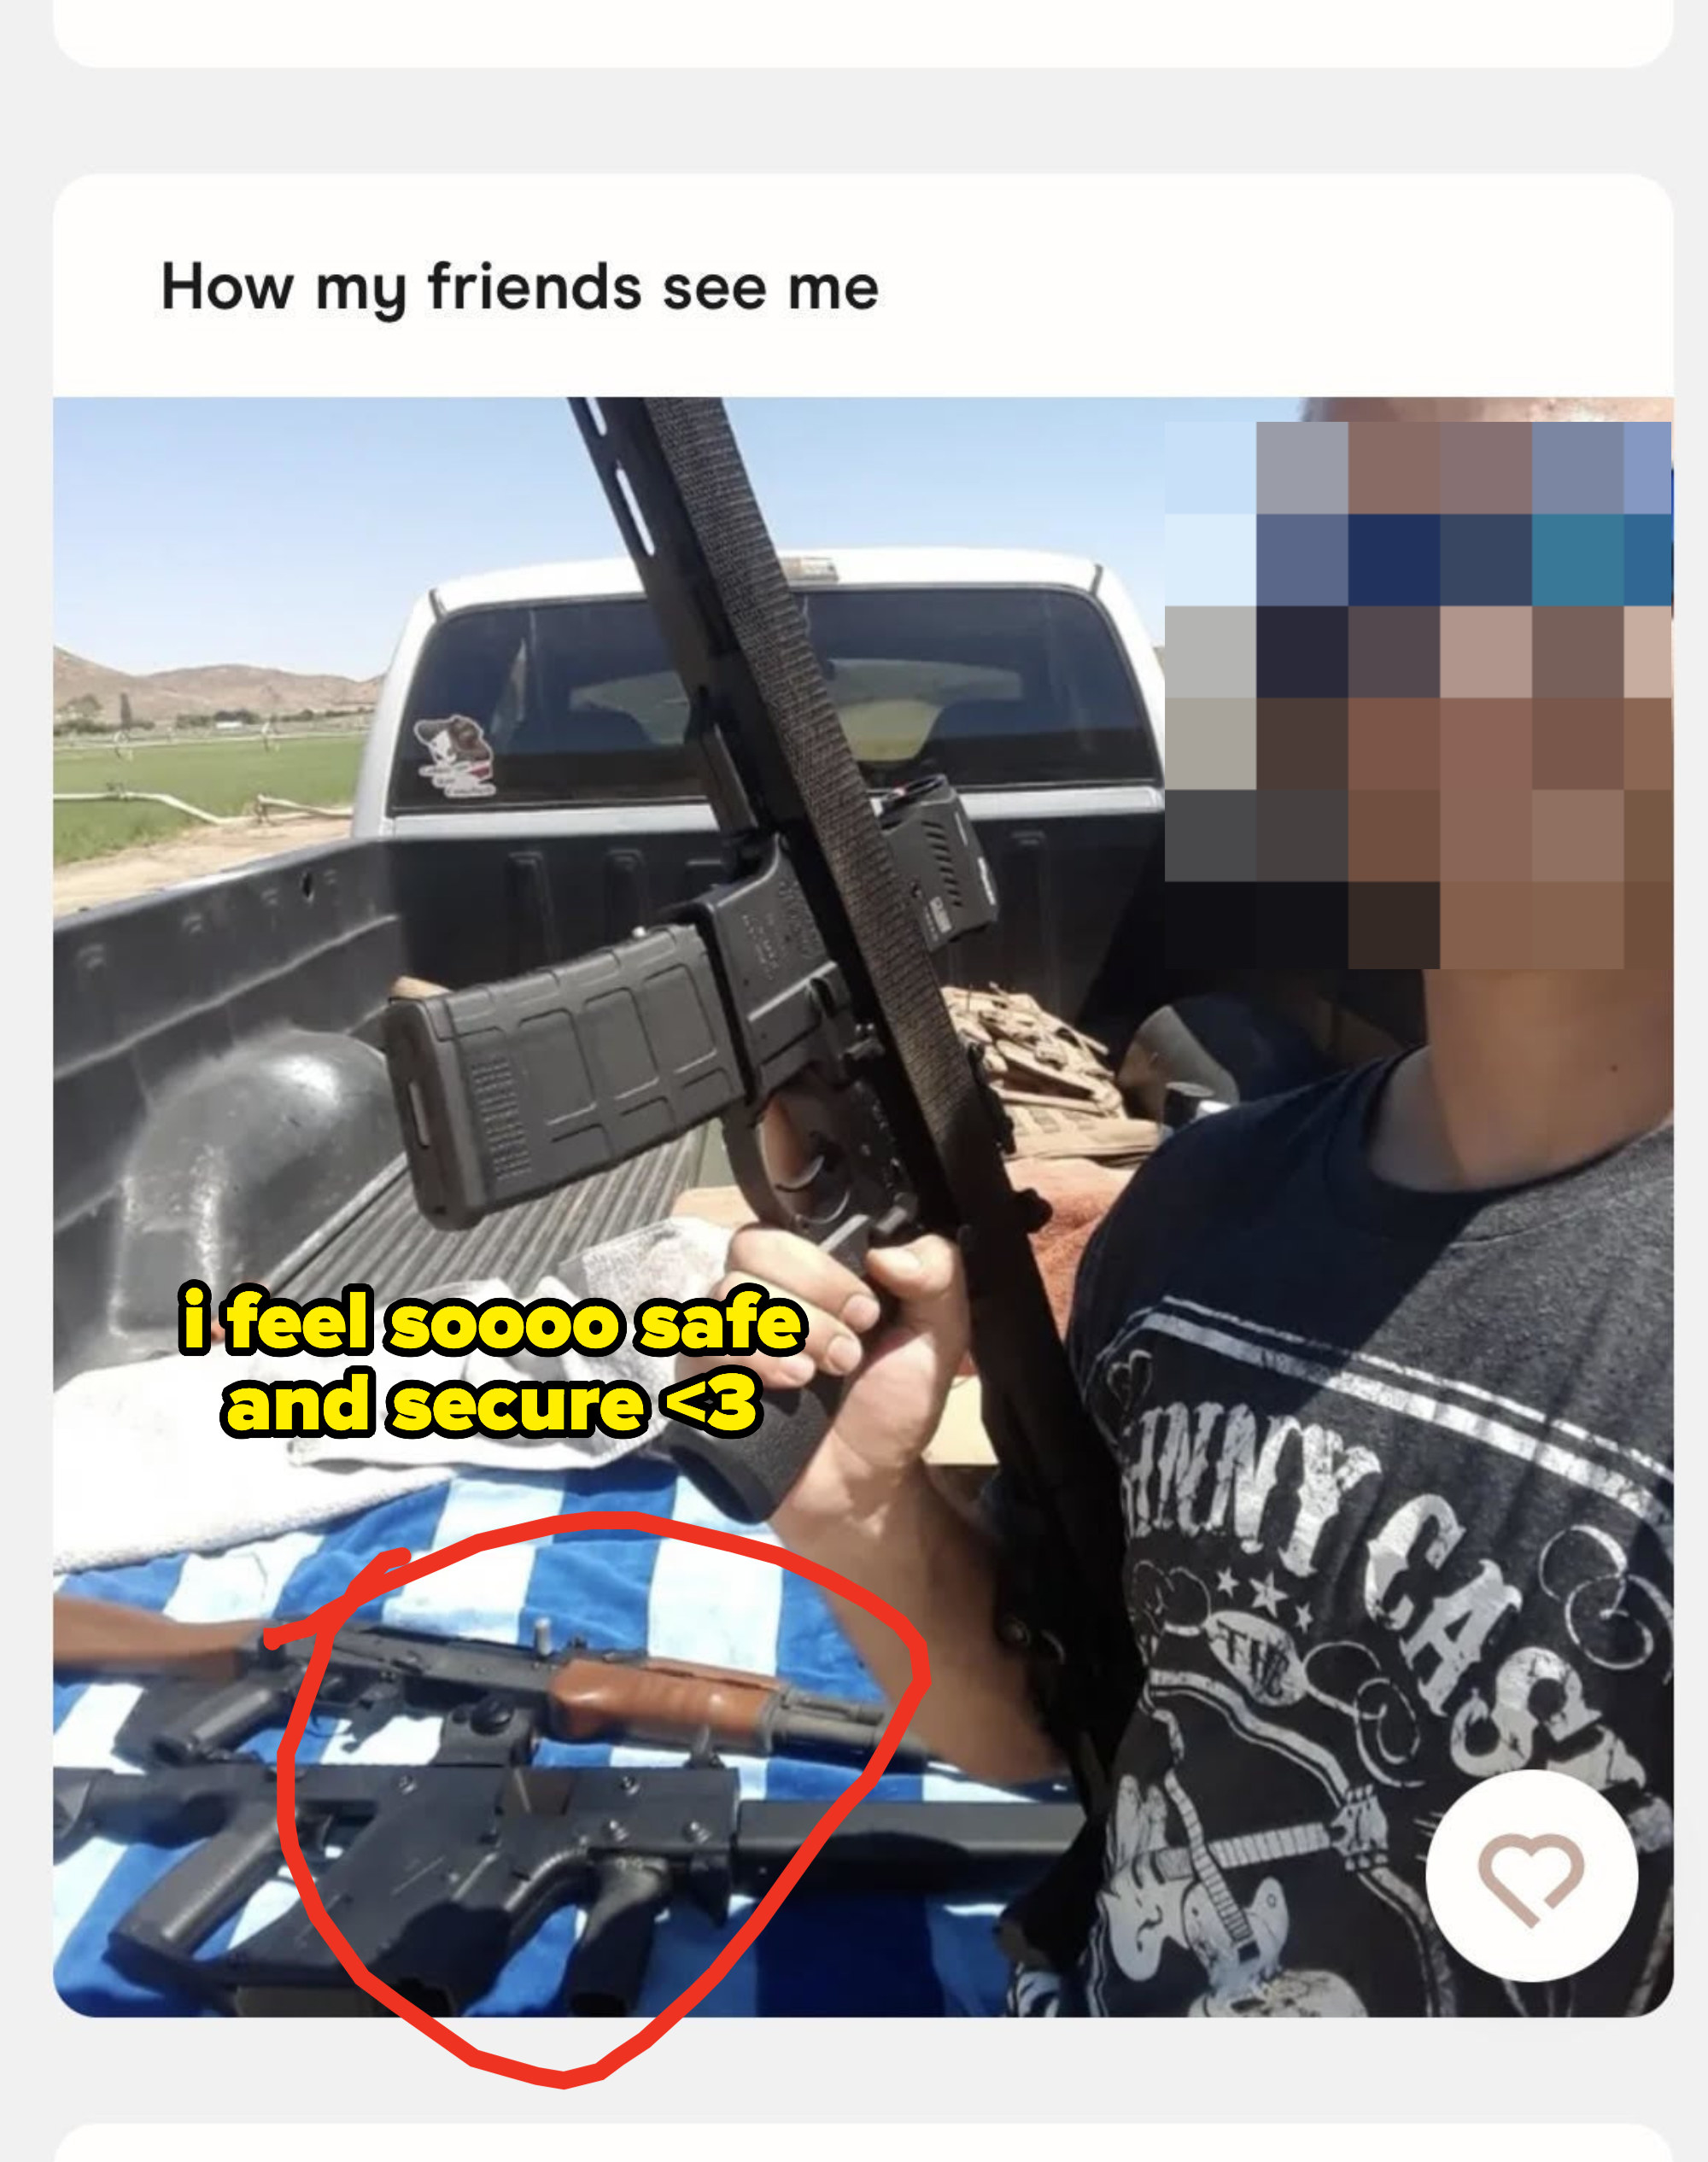 A photo of a guy holding guns